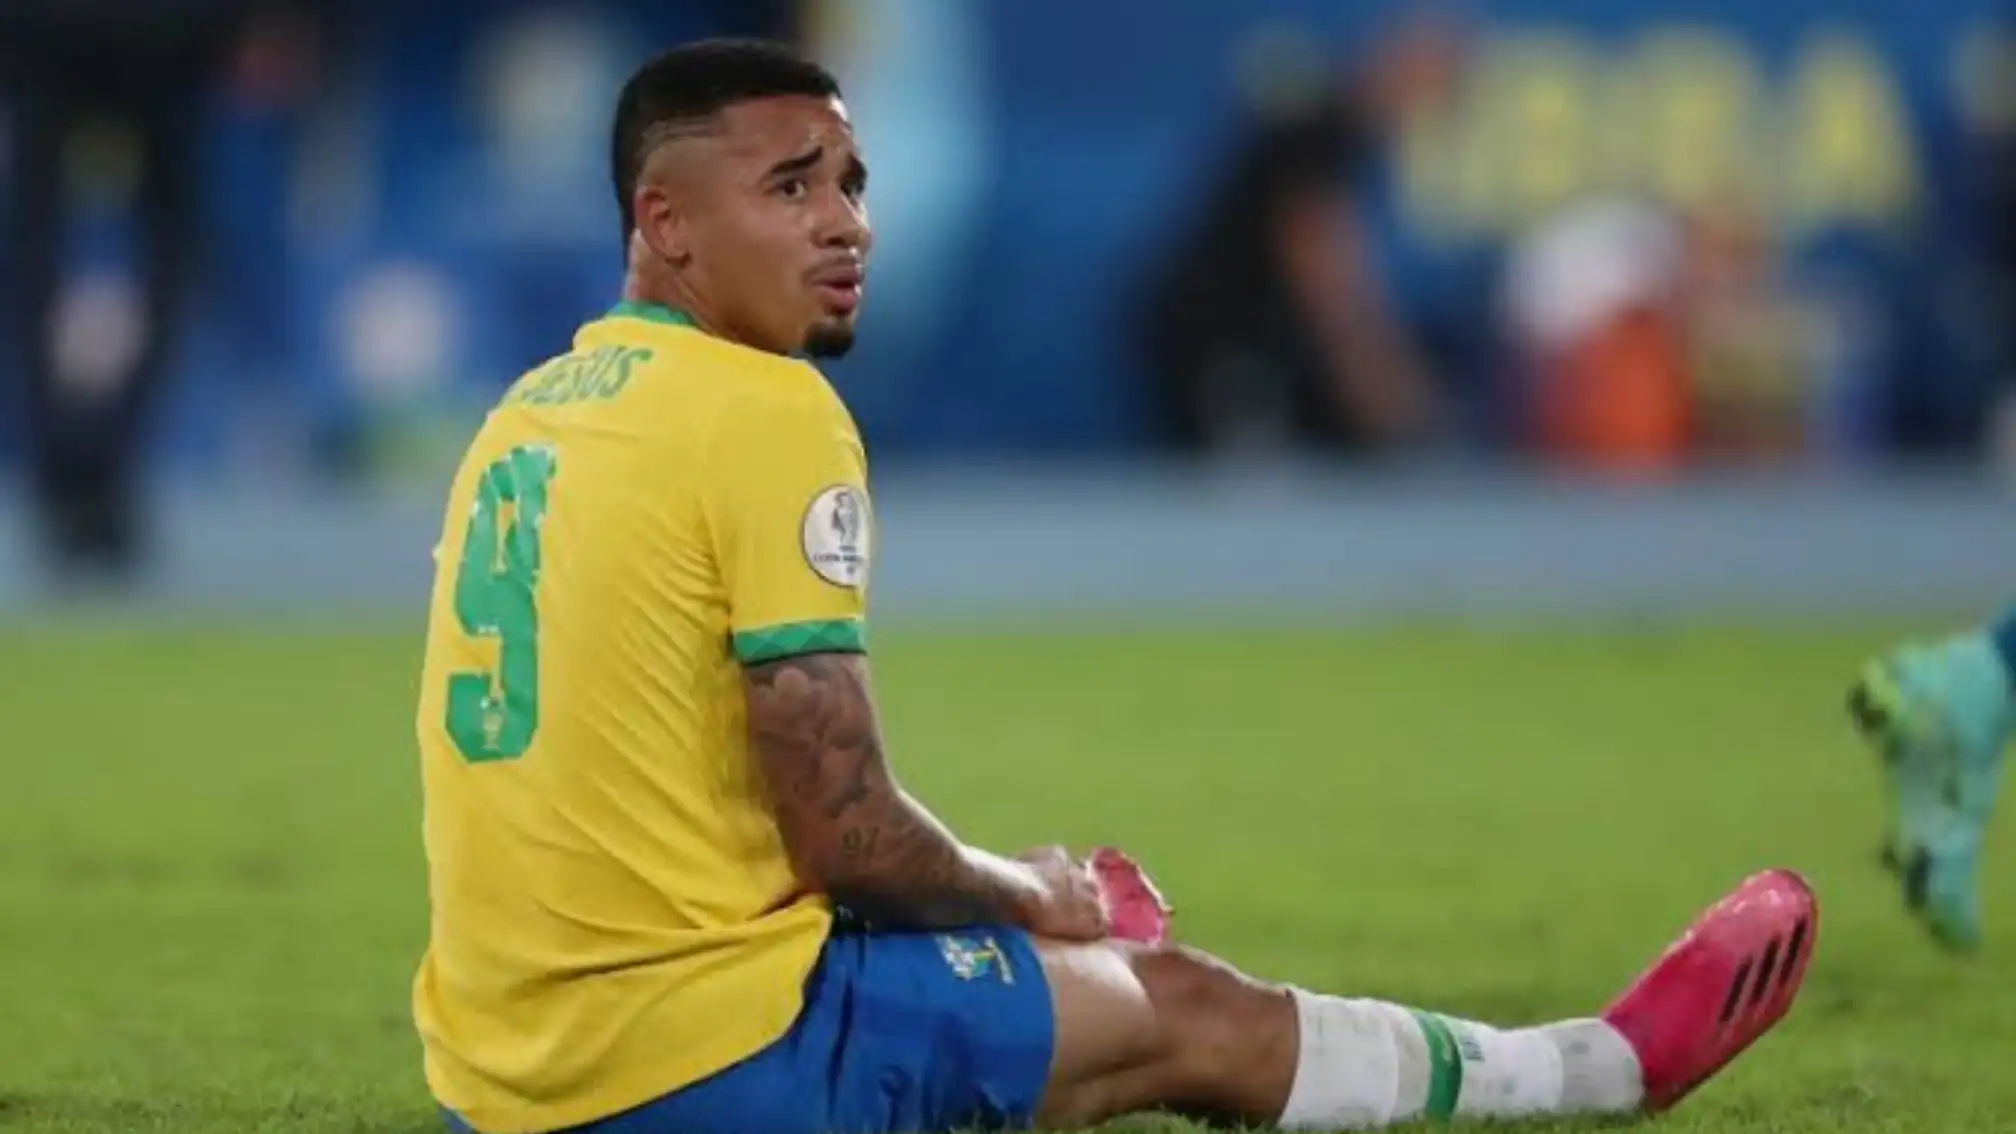 Arsenal deal for Gabriel Jesus unlikely, claims transfer journalist